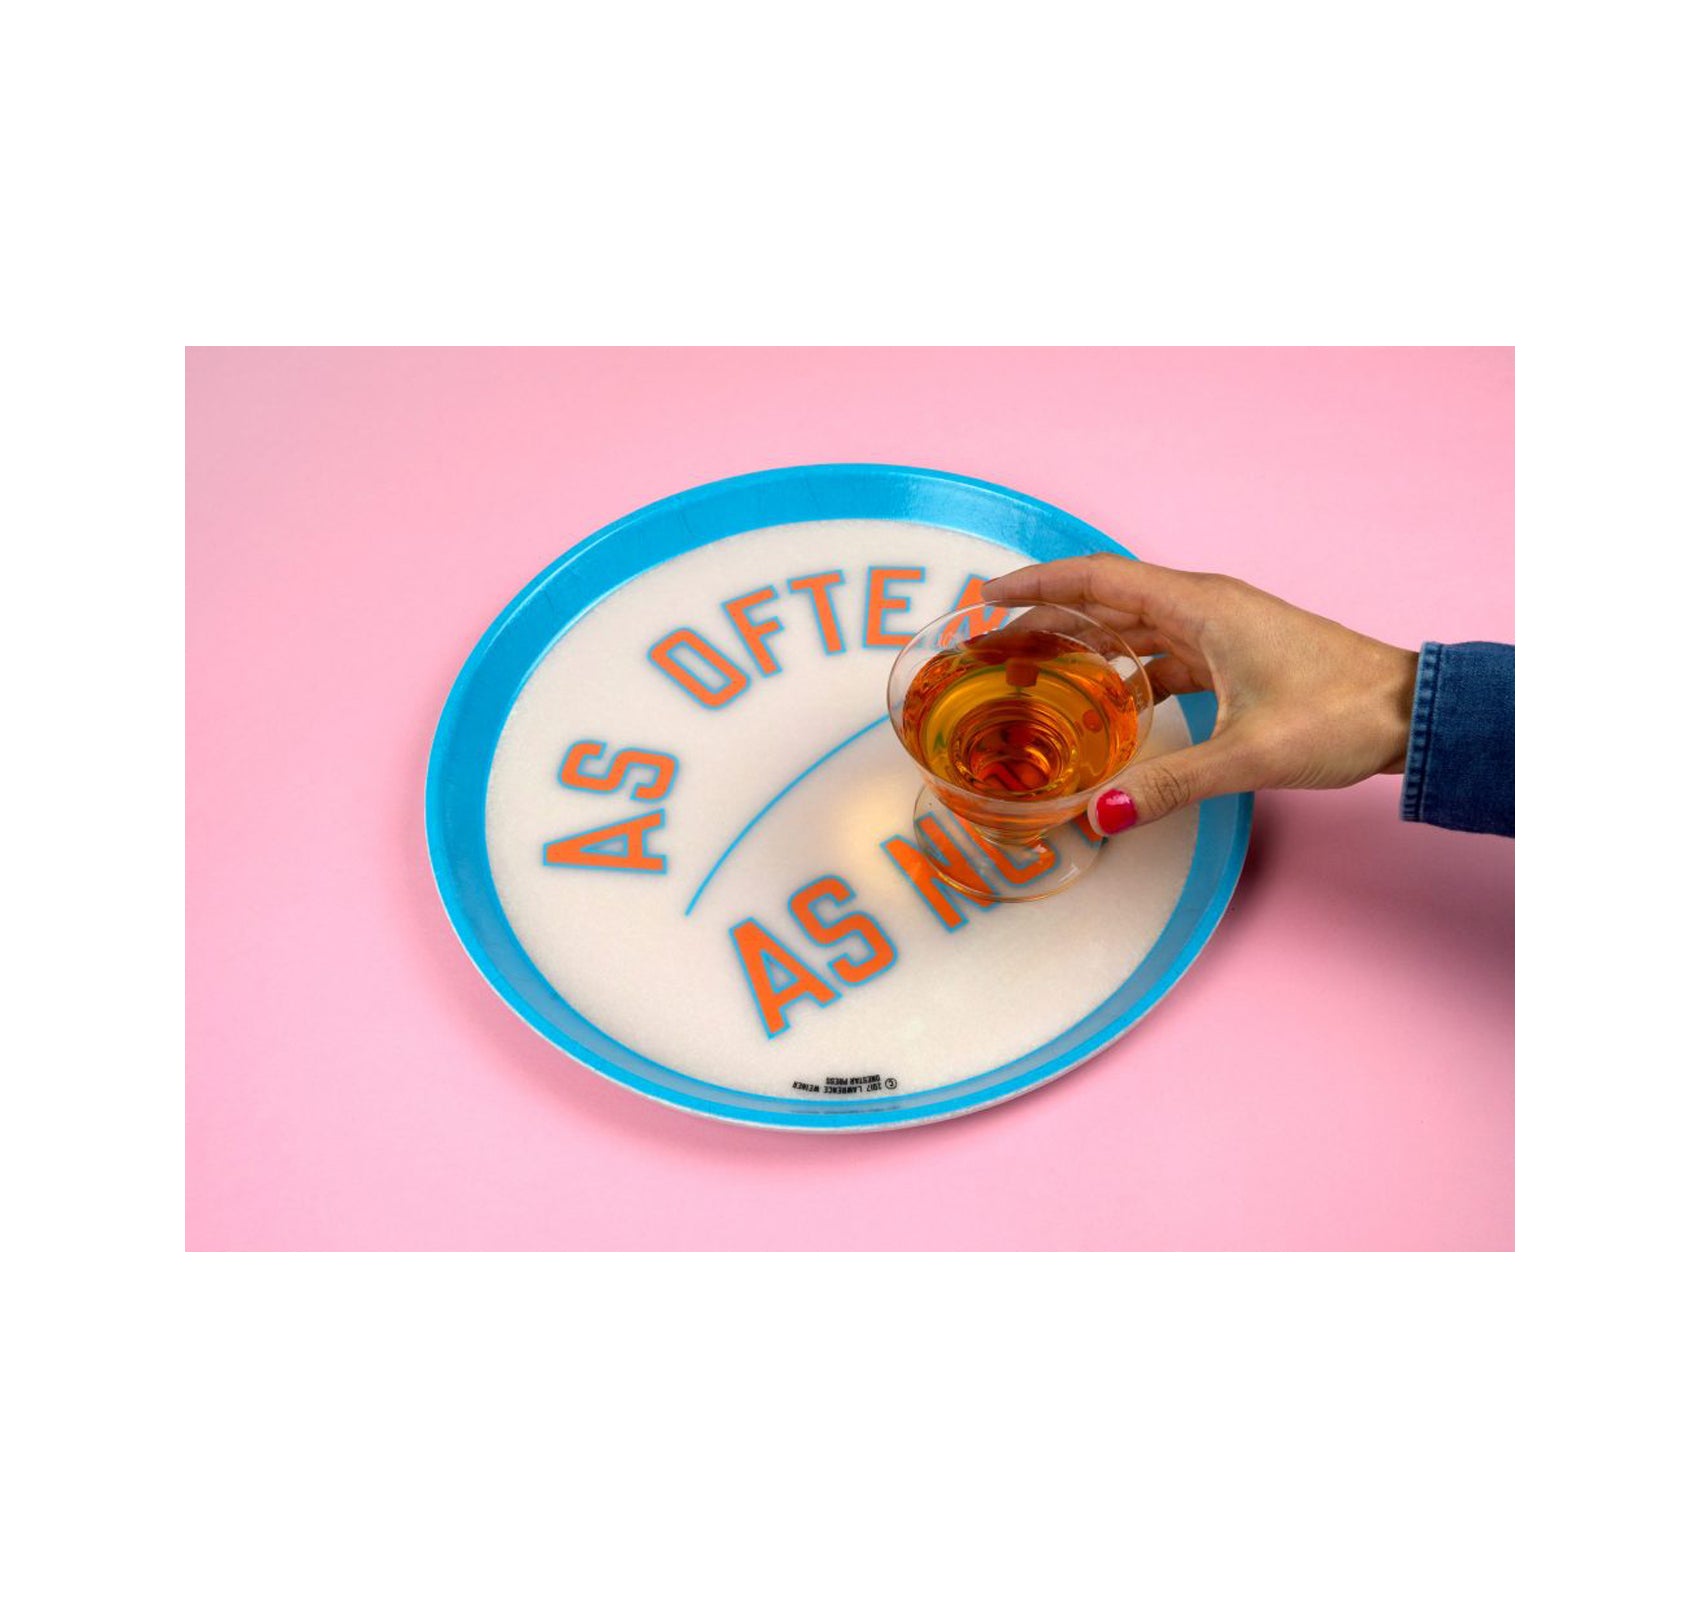 AS OFTEN AS NOT – TRAY by Lawrence Weiner